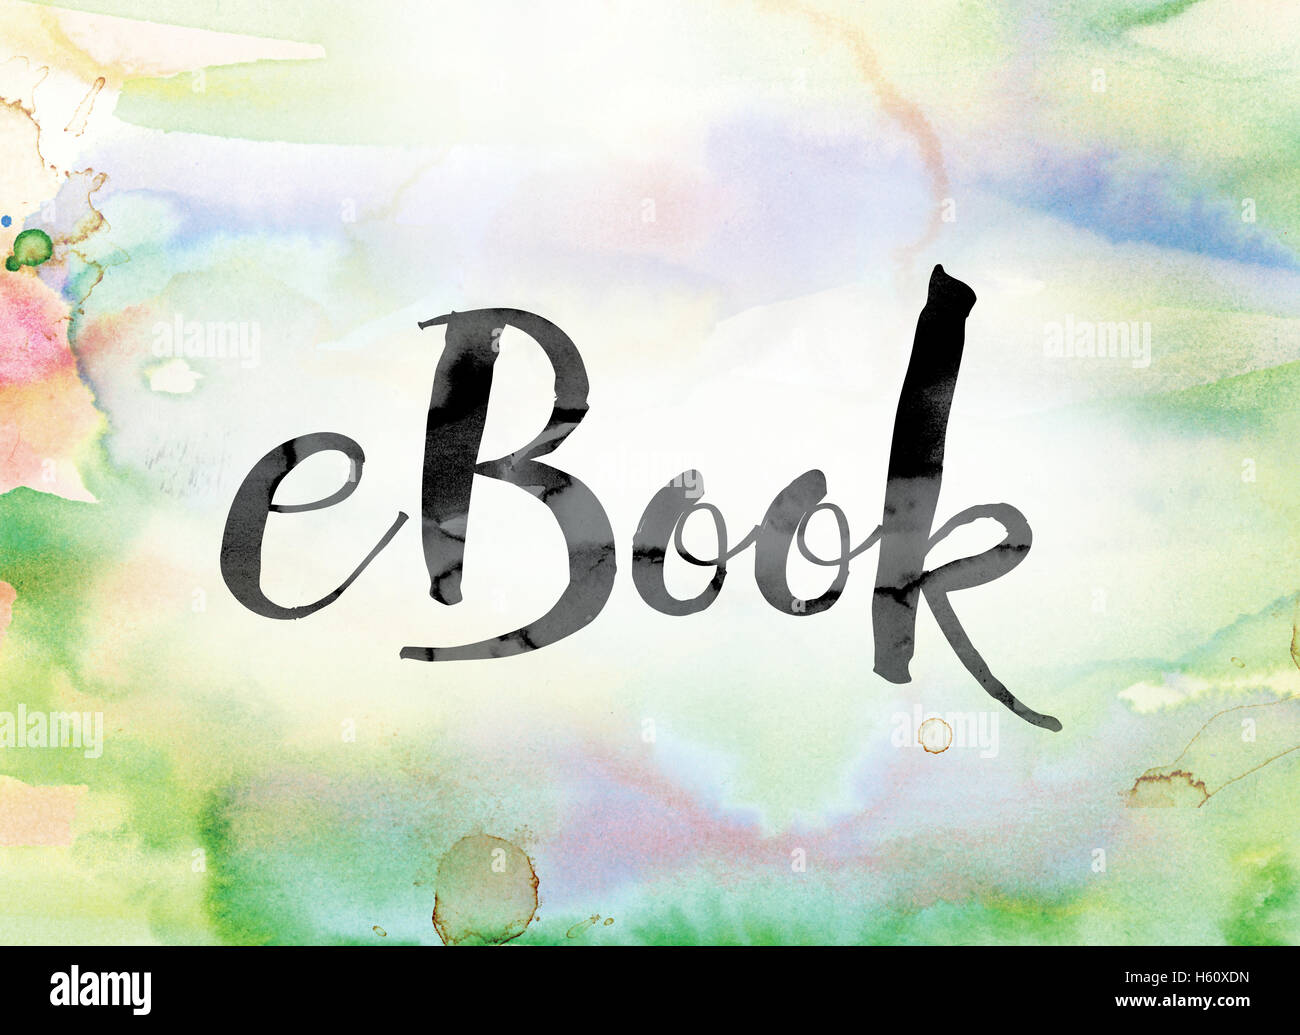 The word 'Ebook' painted in black ink over a colorful watercolor washed background concept and theme. Stock Photo